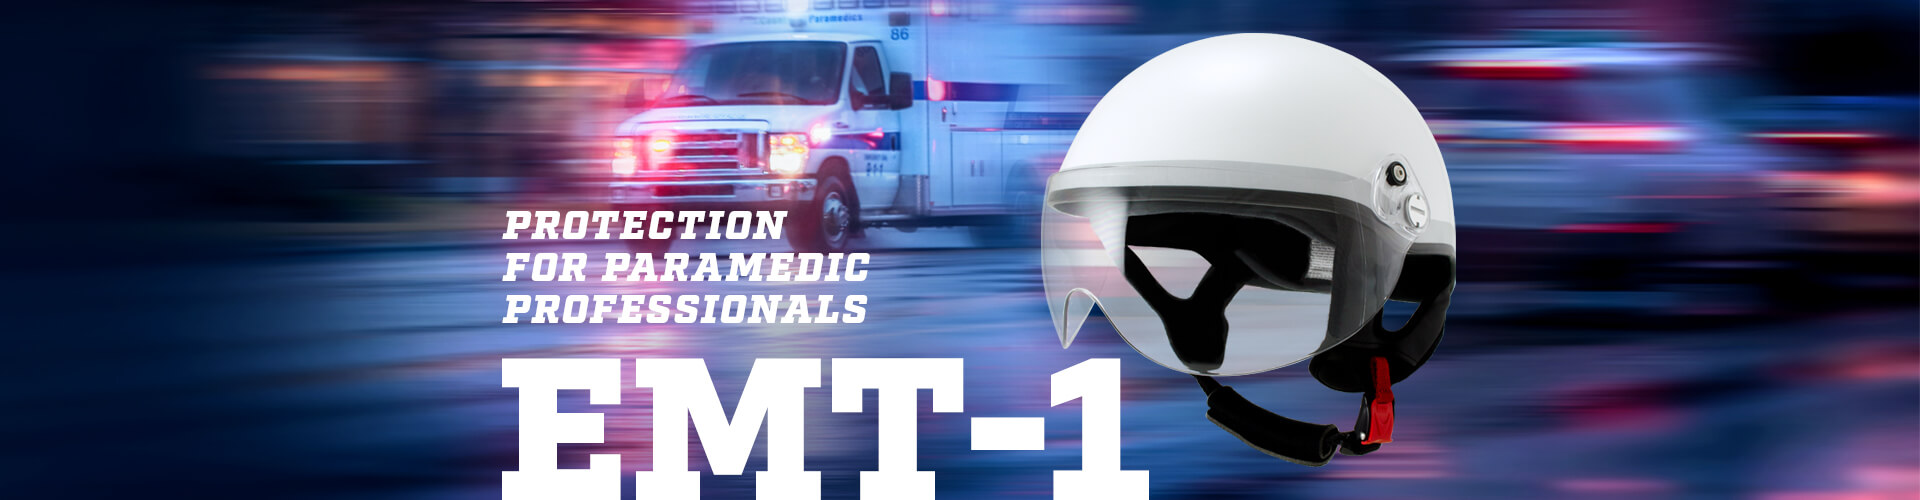 B2 EMT-1. Protection for paramedic professionals.